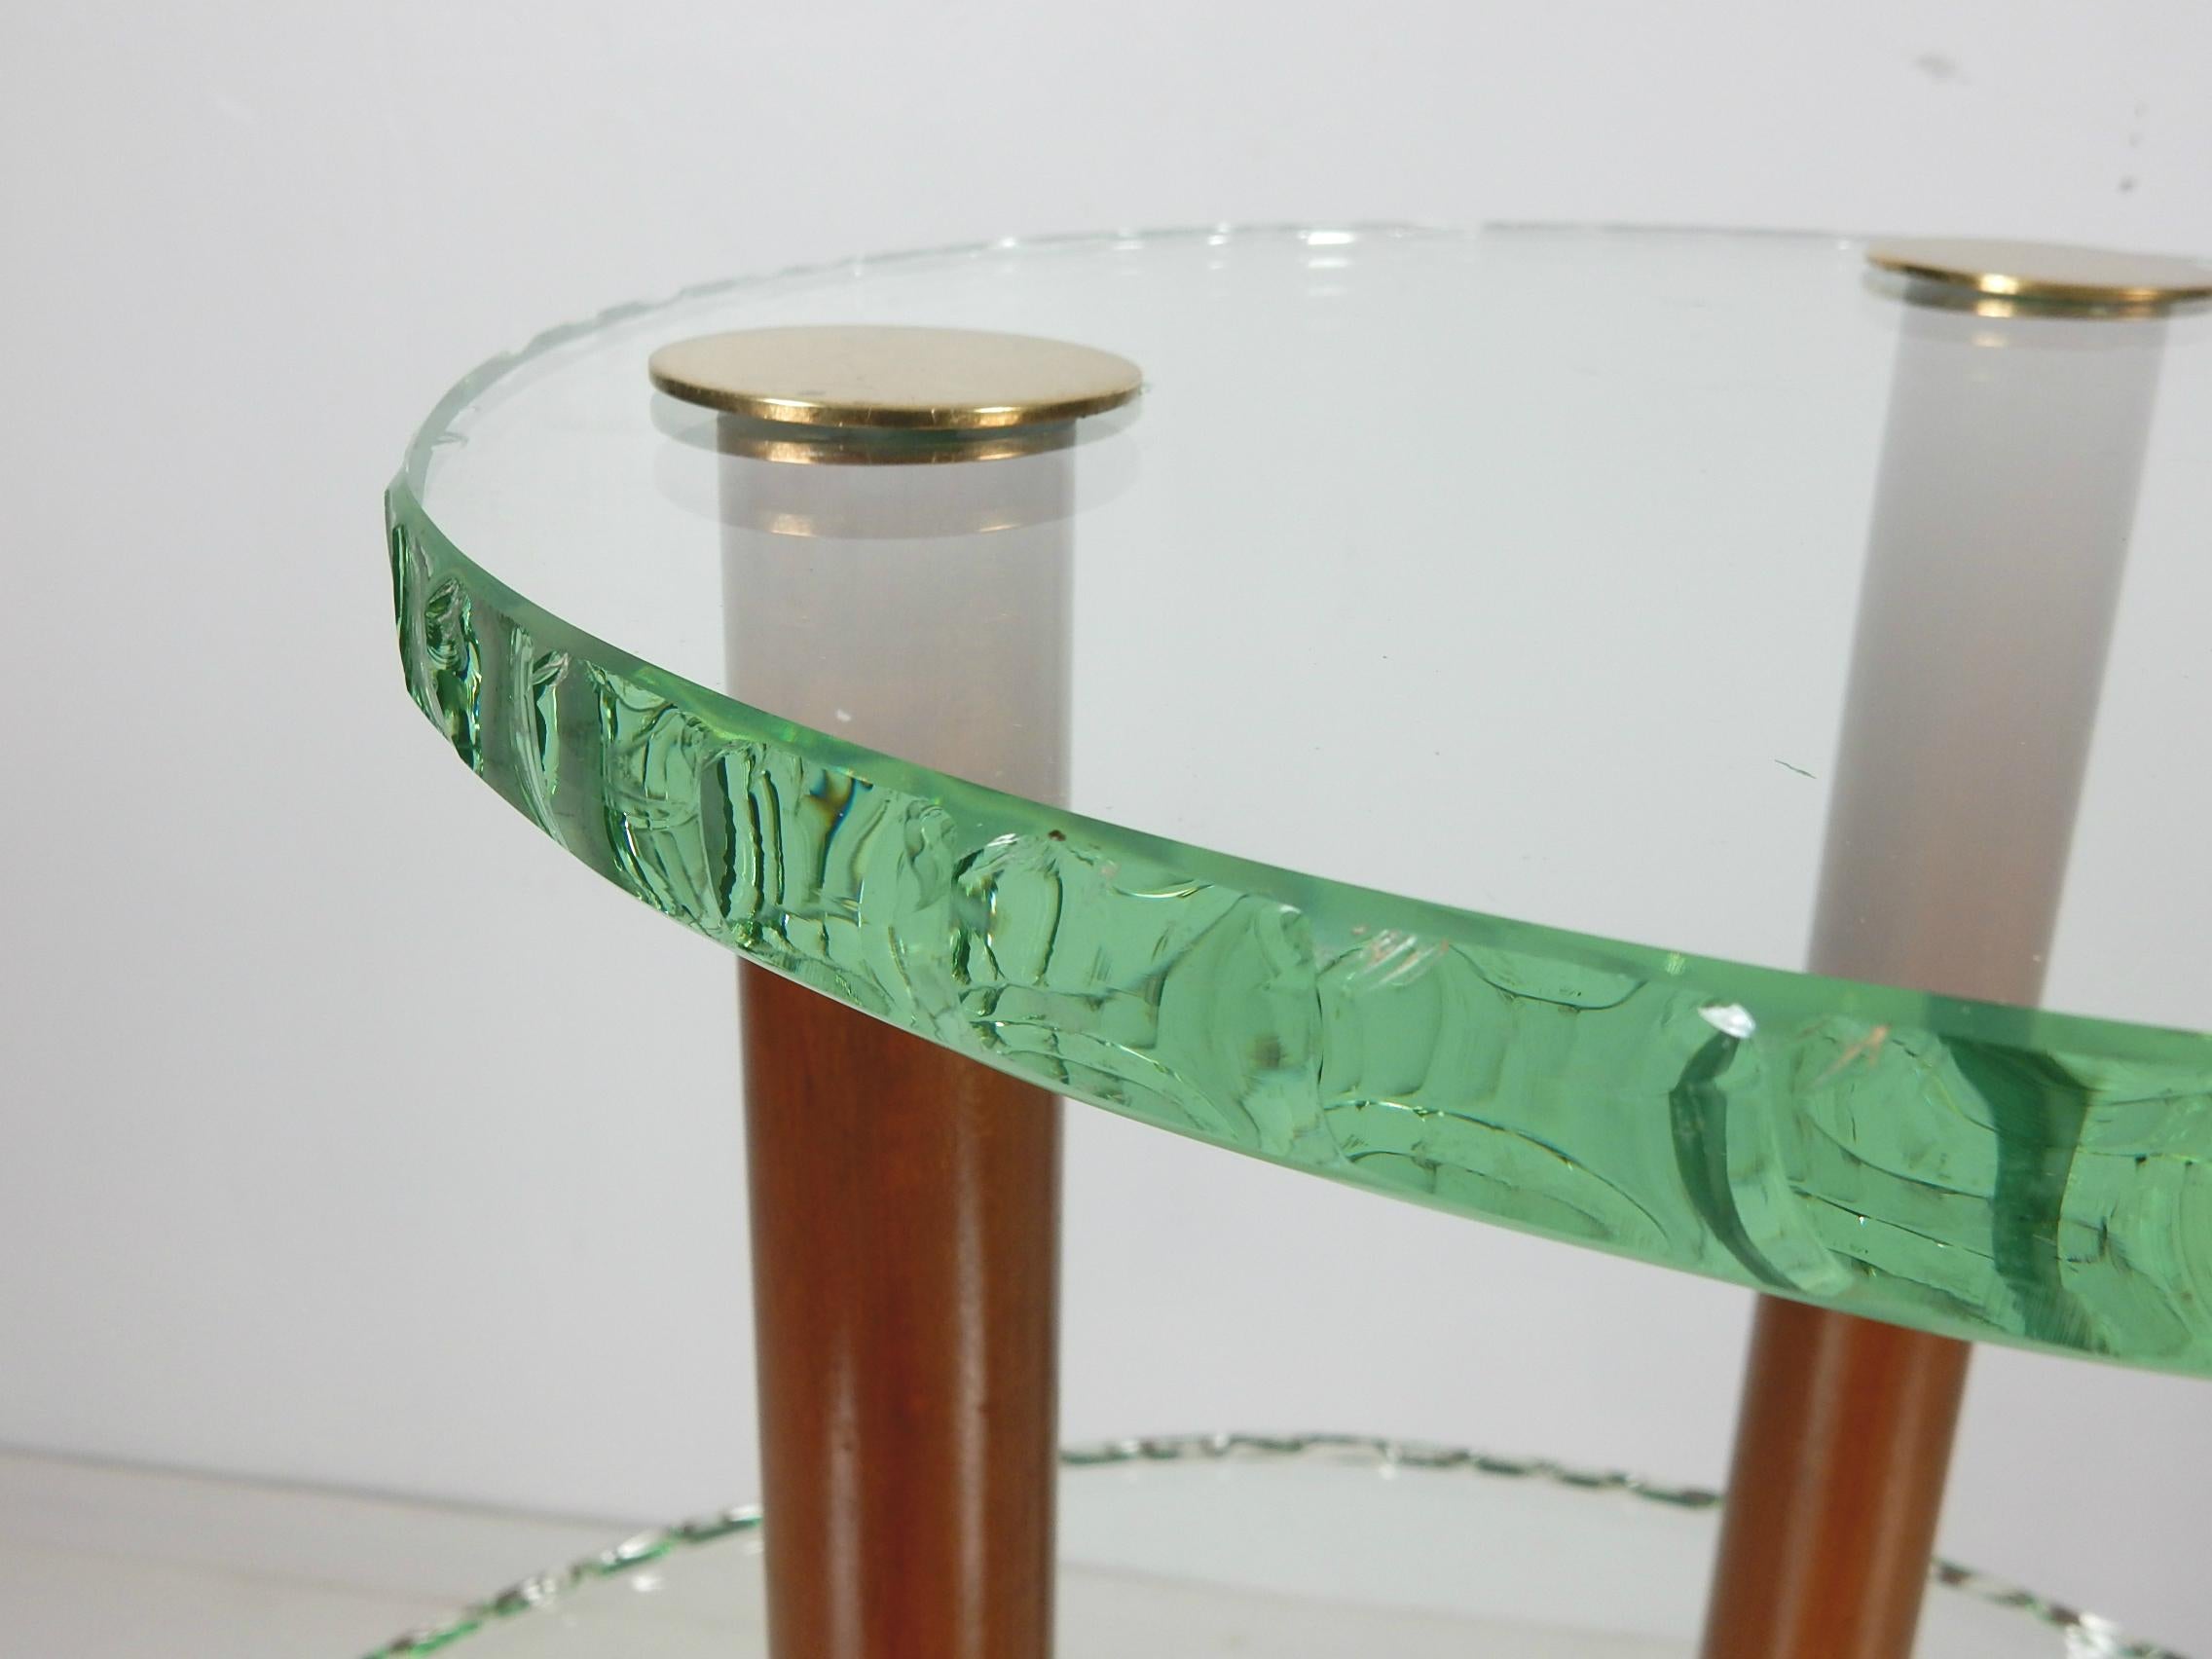 Chiseled Edge Green Glass Etagere' Vitrine Table after Max Ingrand In Good Condition For Sale In Las Vegas, NV